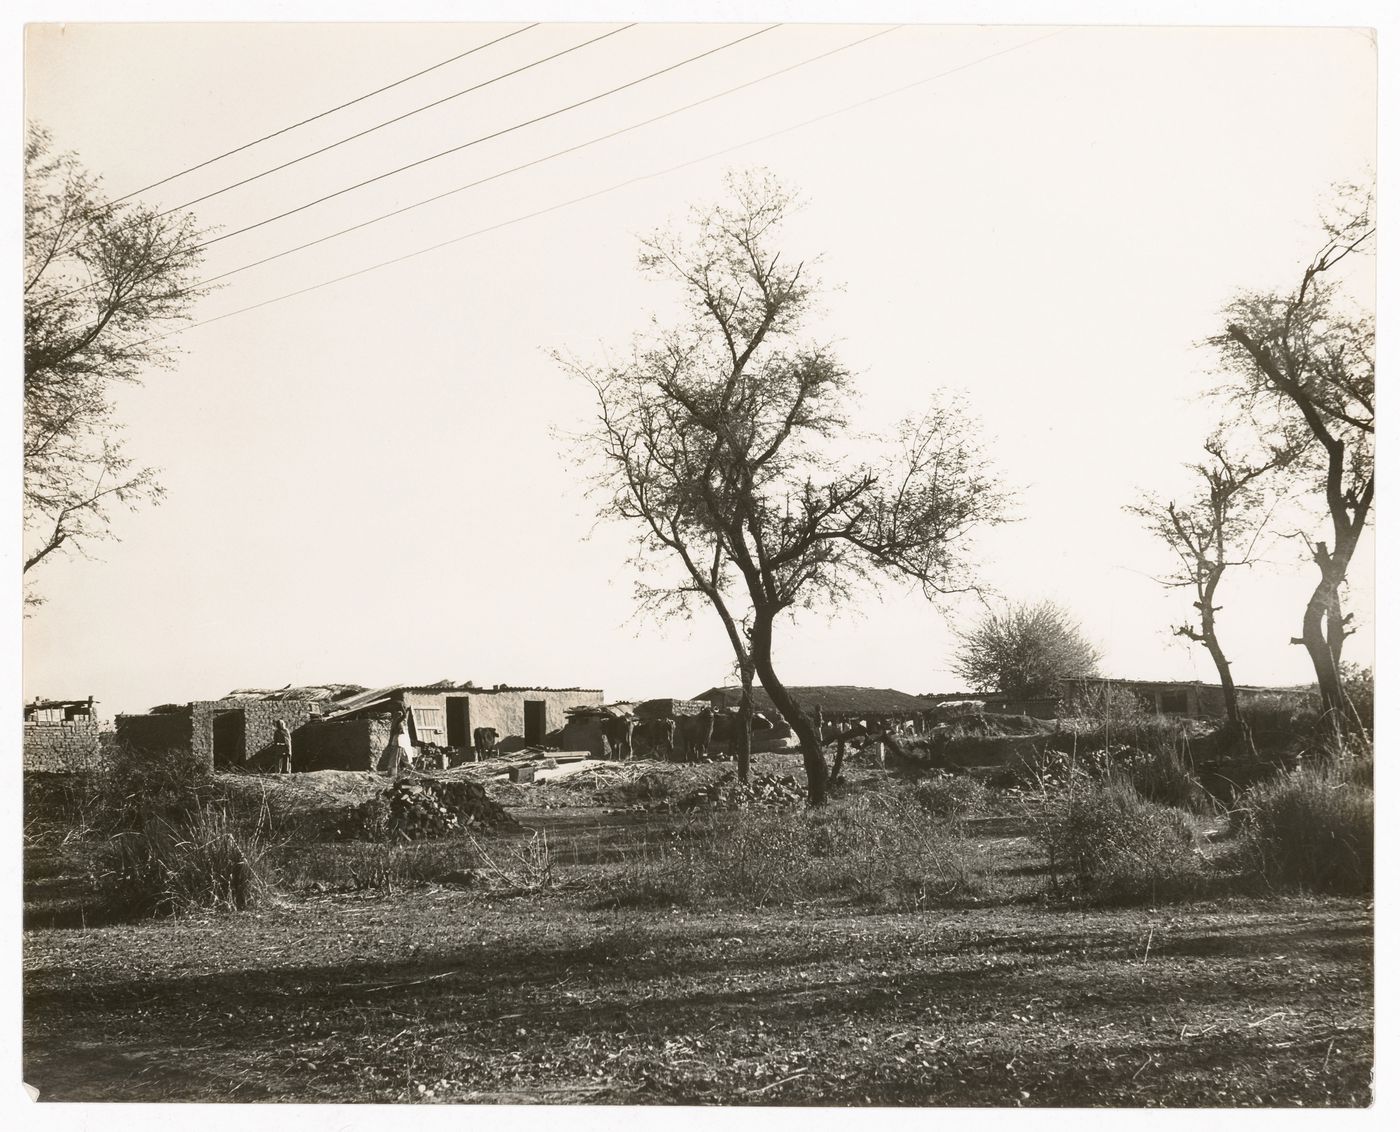 Photograph of Indian village likely near Chandigarh, India